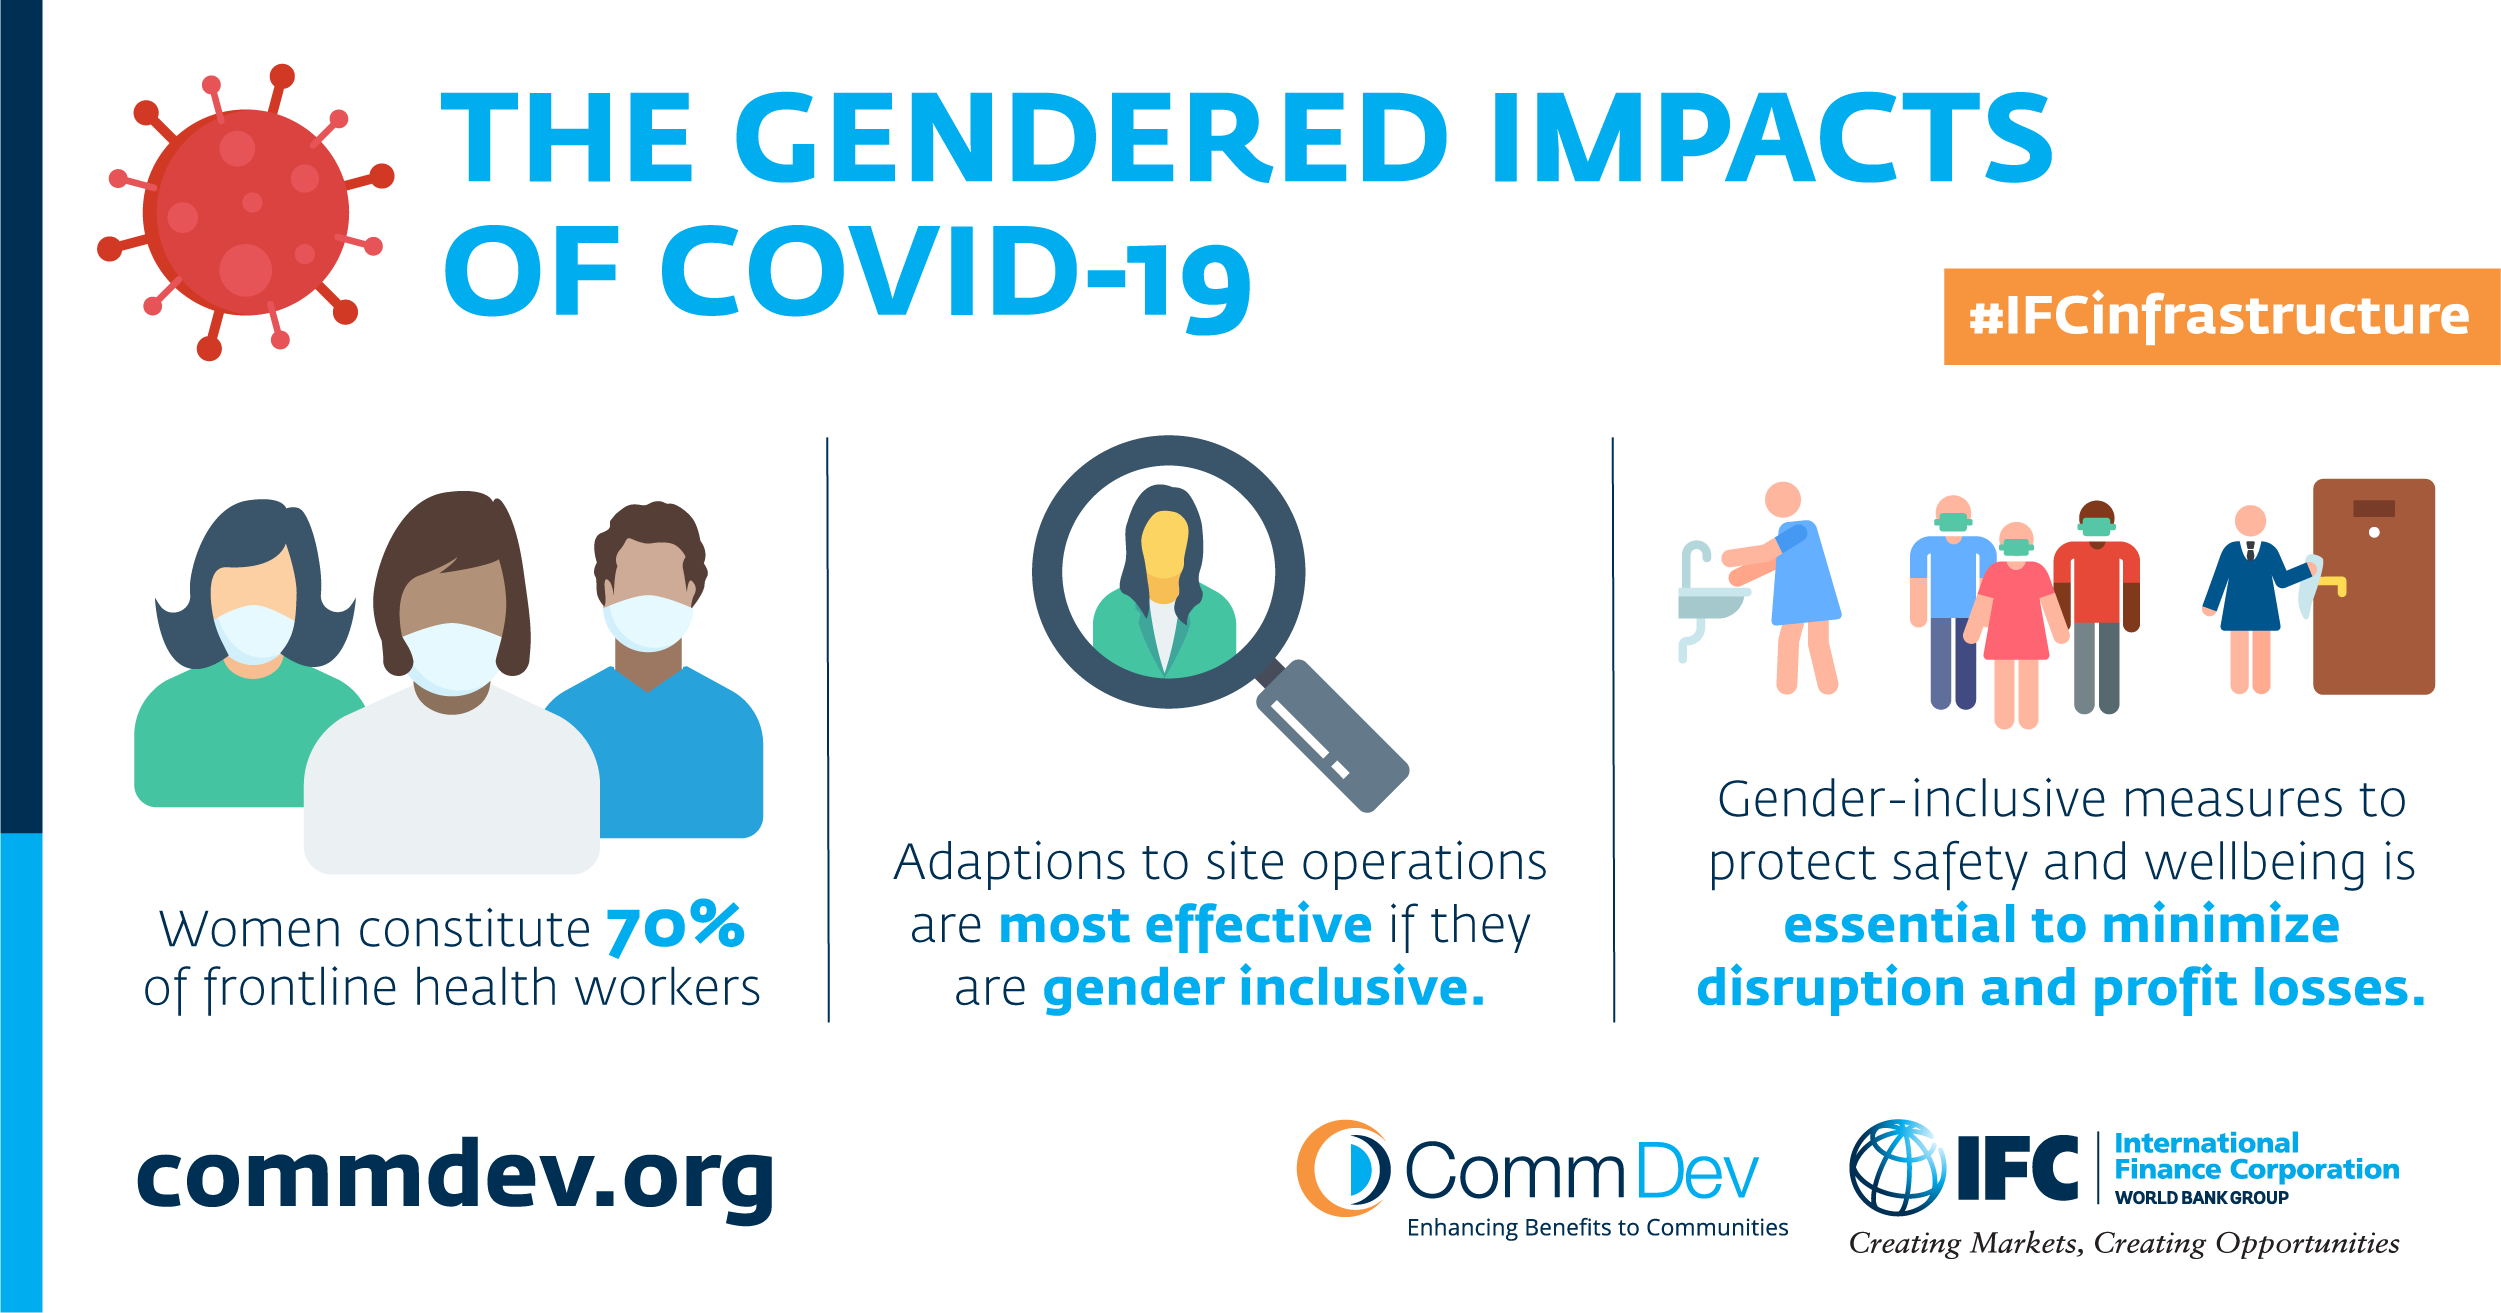 The Gendered Impacts of COVID-19: How the Private Sector Can Play a Crucial Role